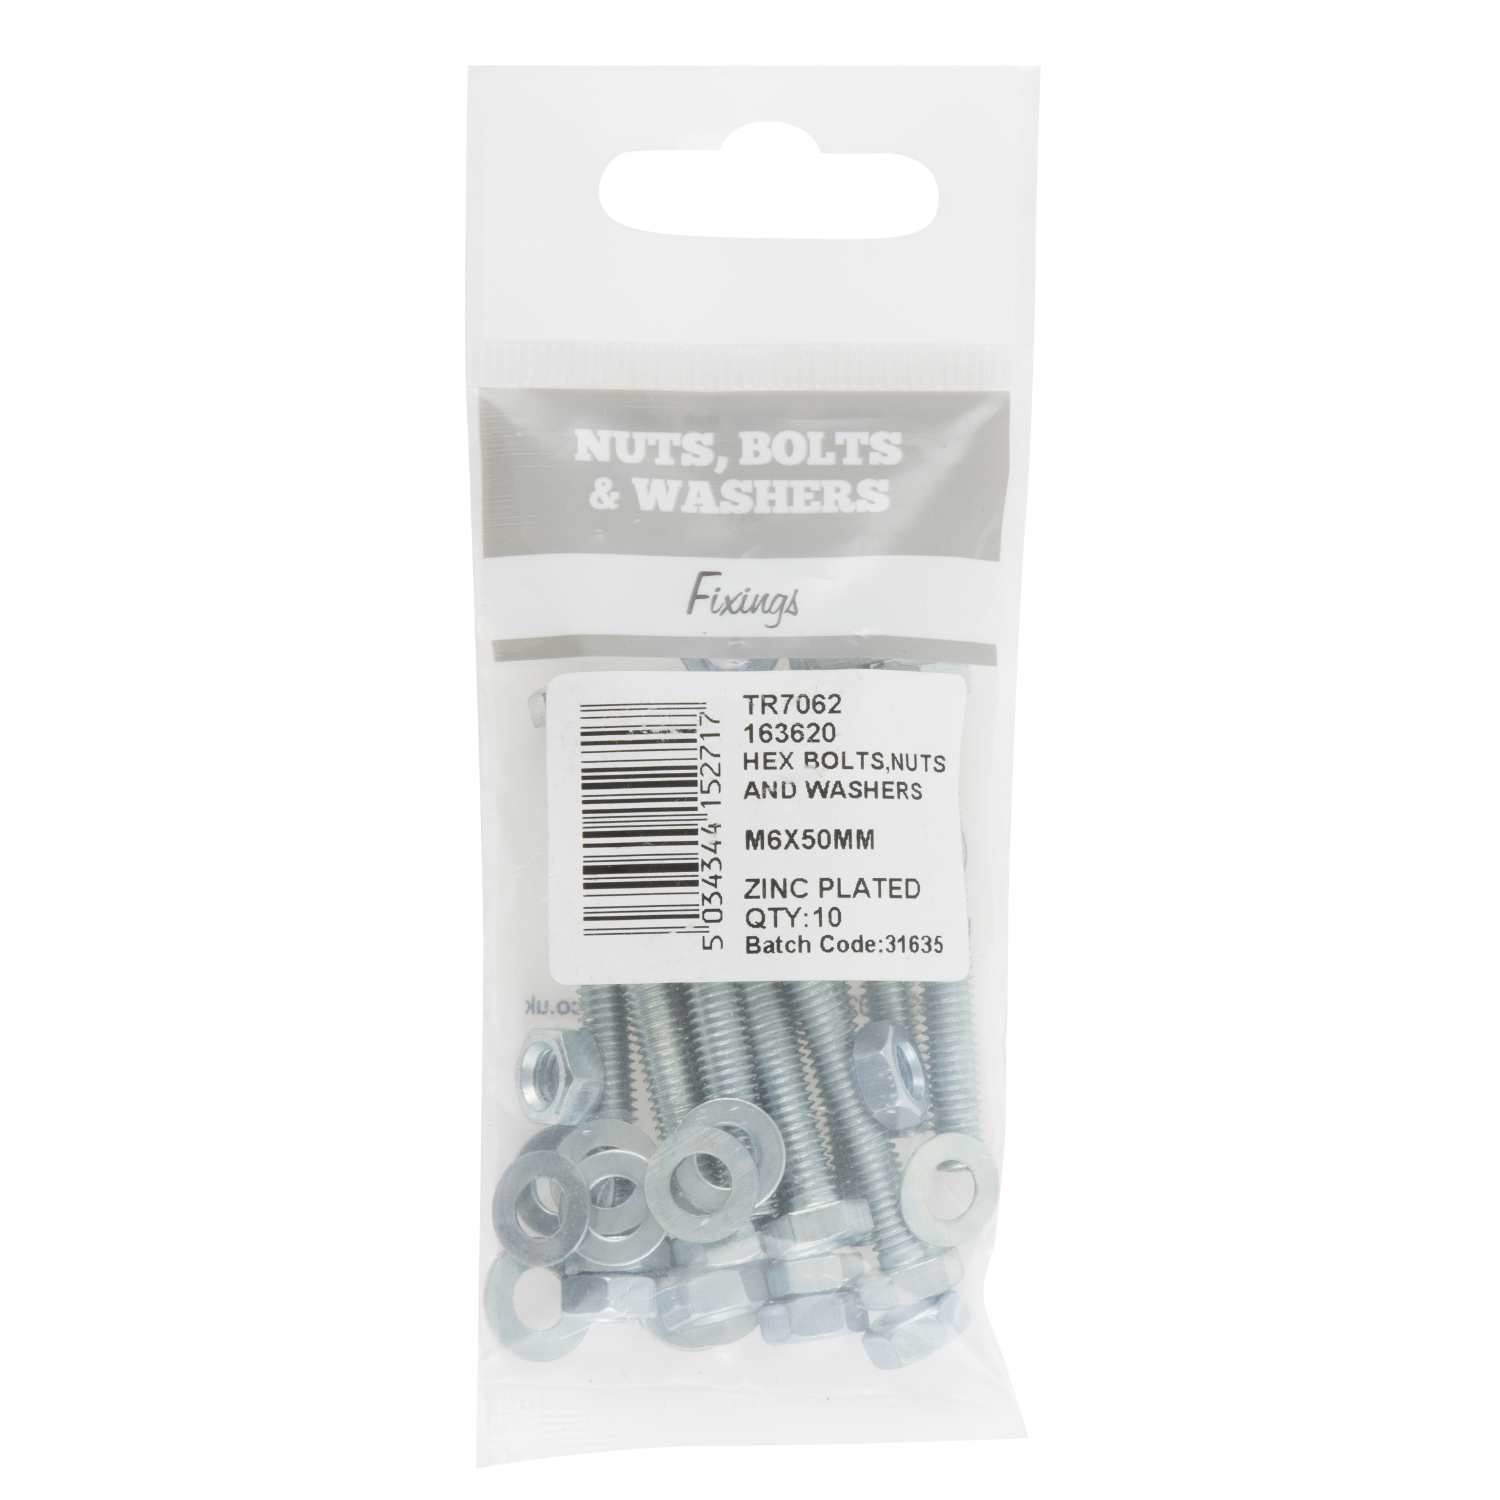 Hiatt M6 x 50mm Hex Bolt Nut and Washer 10 Pack Image 1